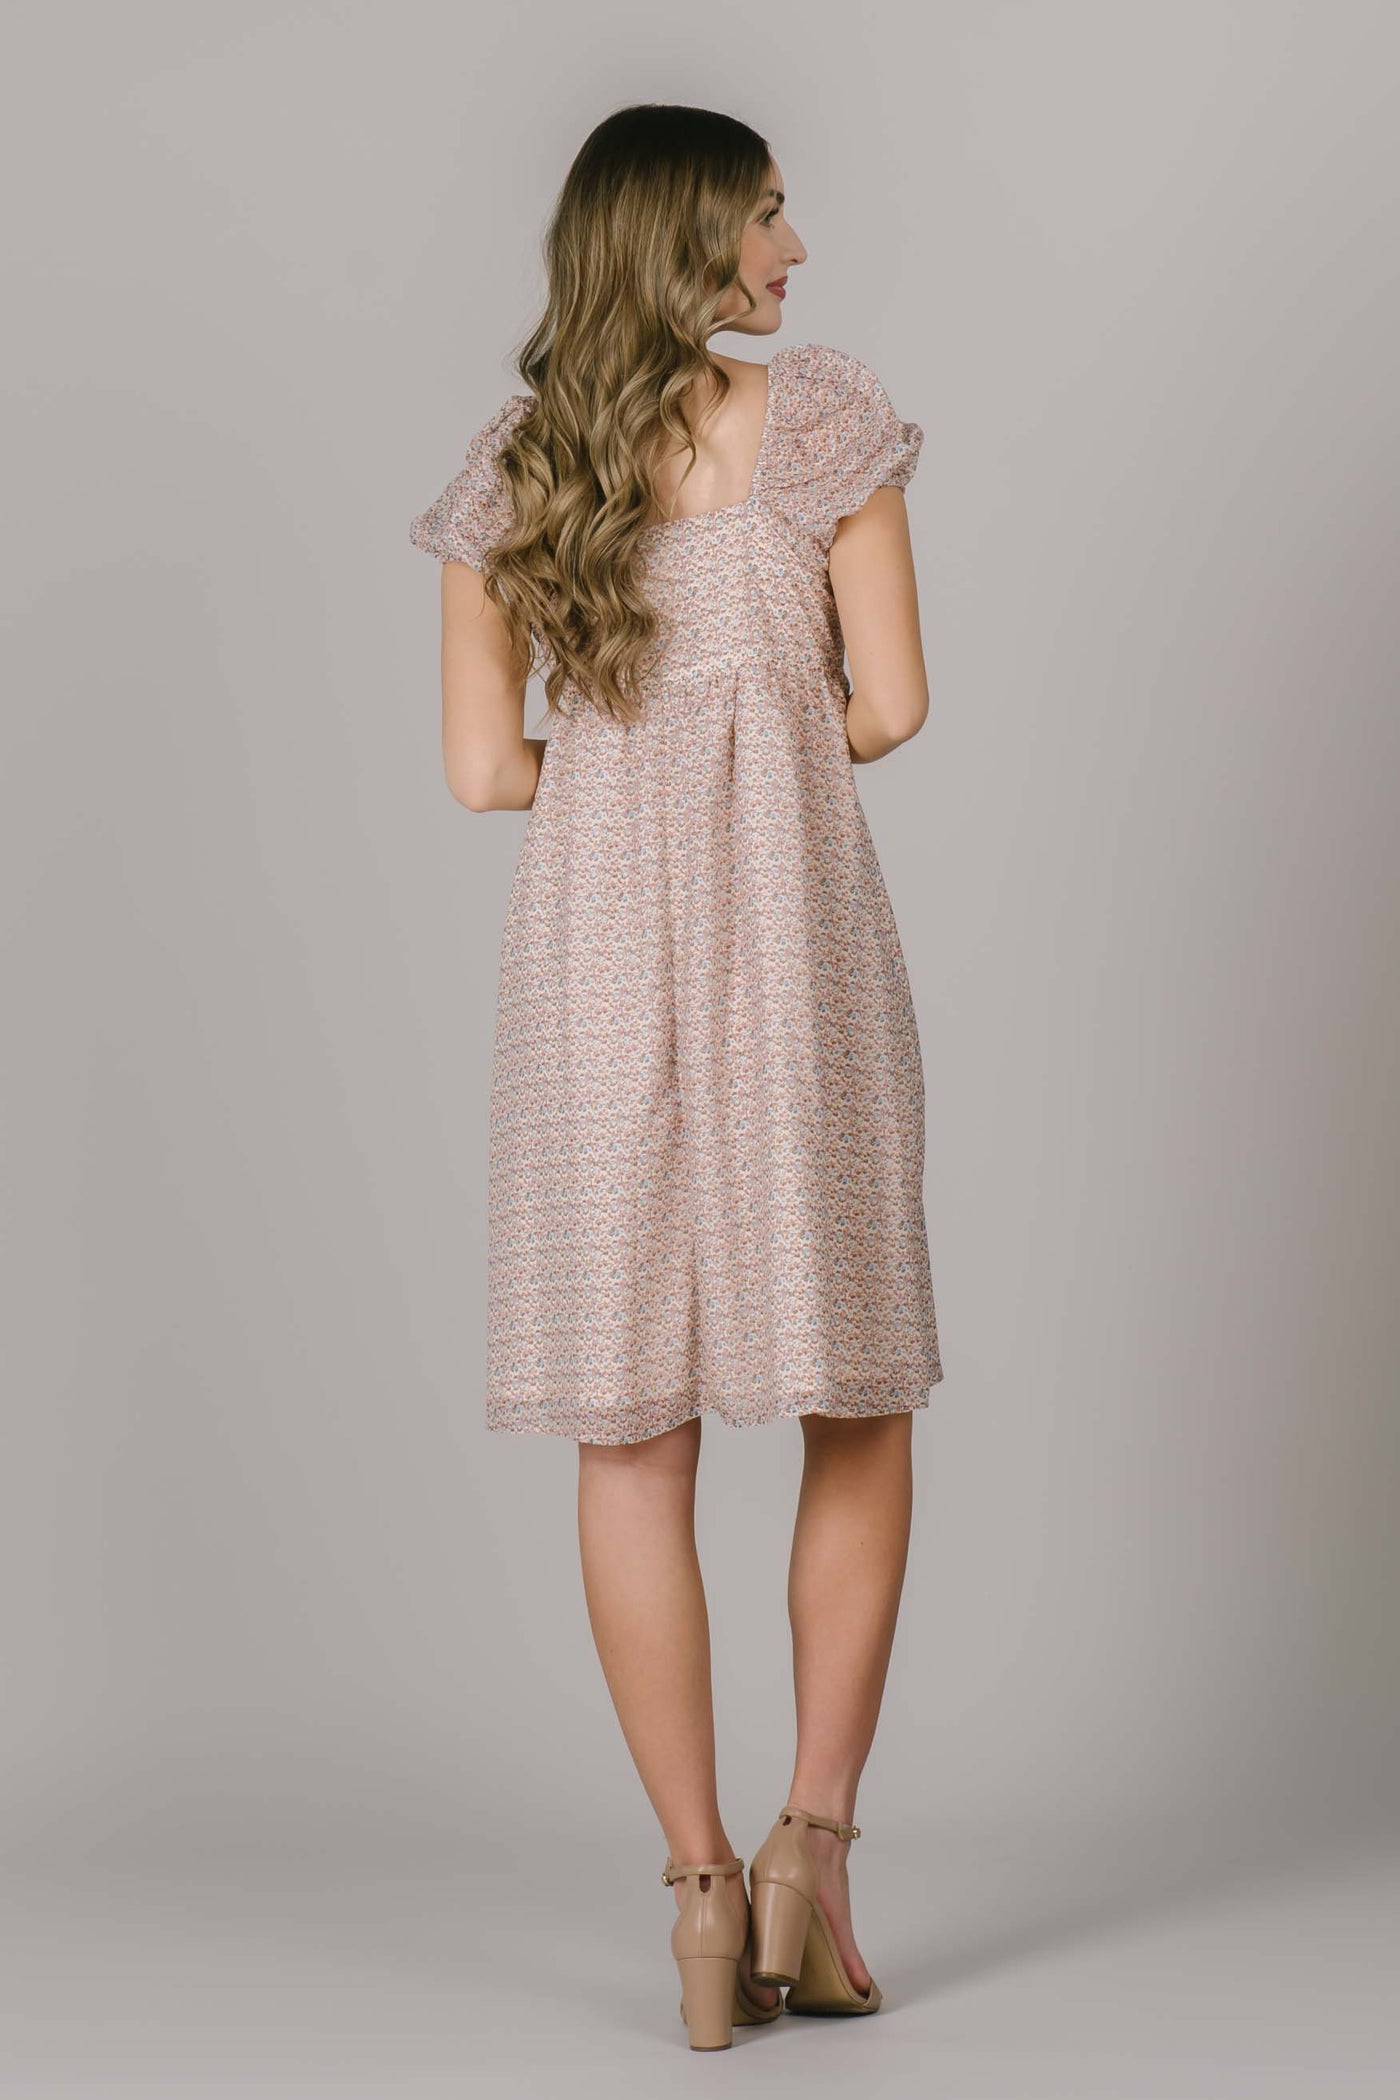 The back of a modest dress with a square backline, puff sleeves, and small floral pattern.